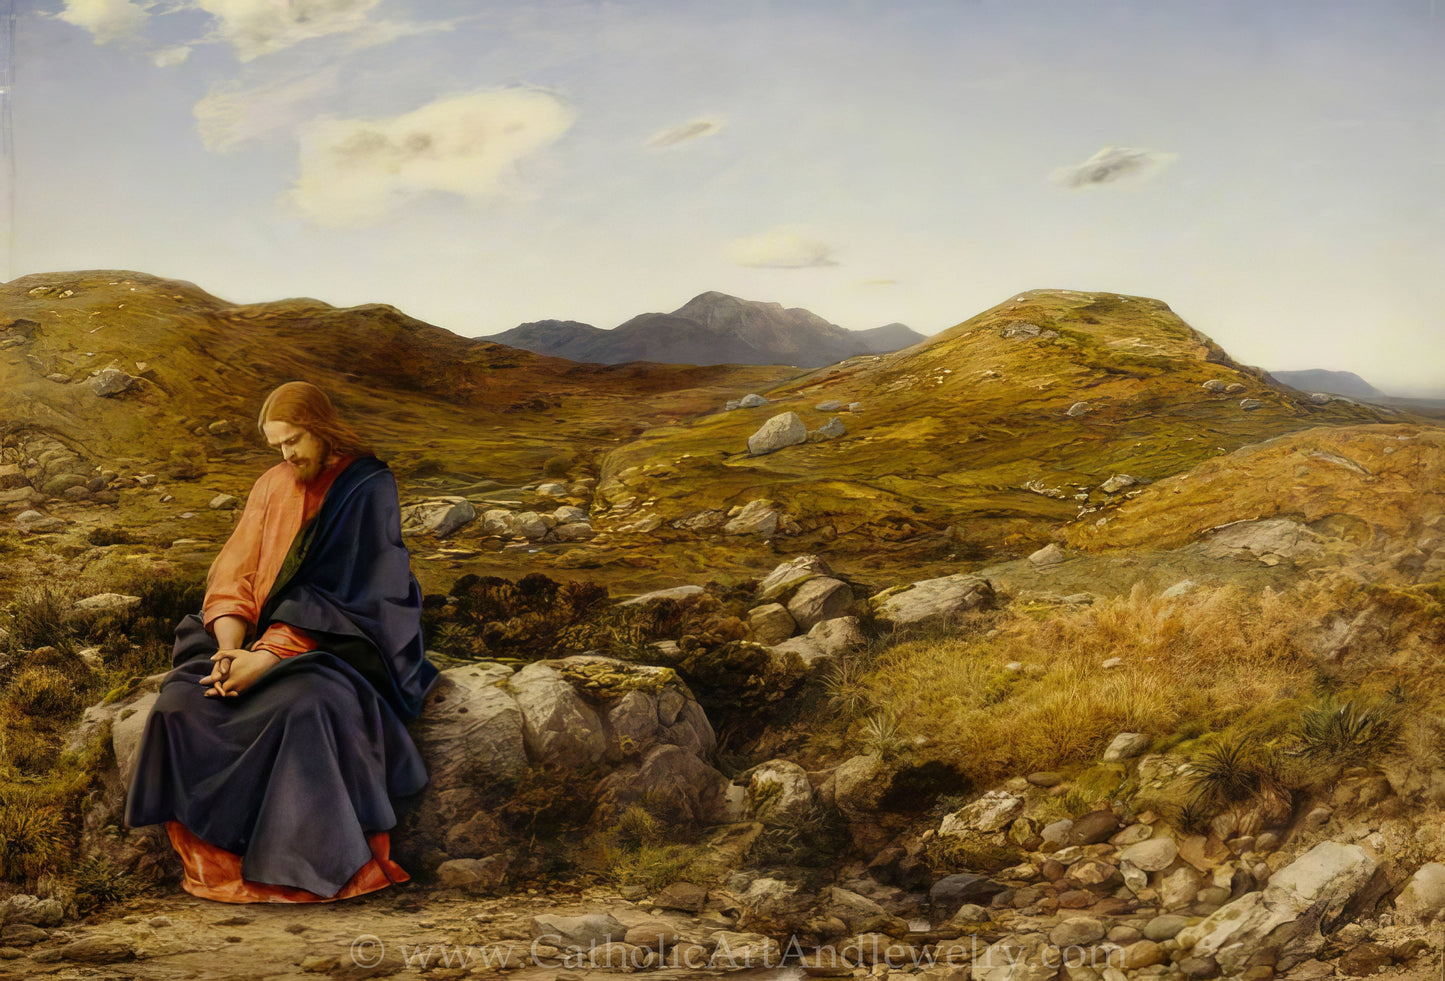 New! Christ in the Desert,“Man of Sorrows" – William Dyce – Beautiful Catholic Art – Archival Quality